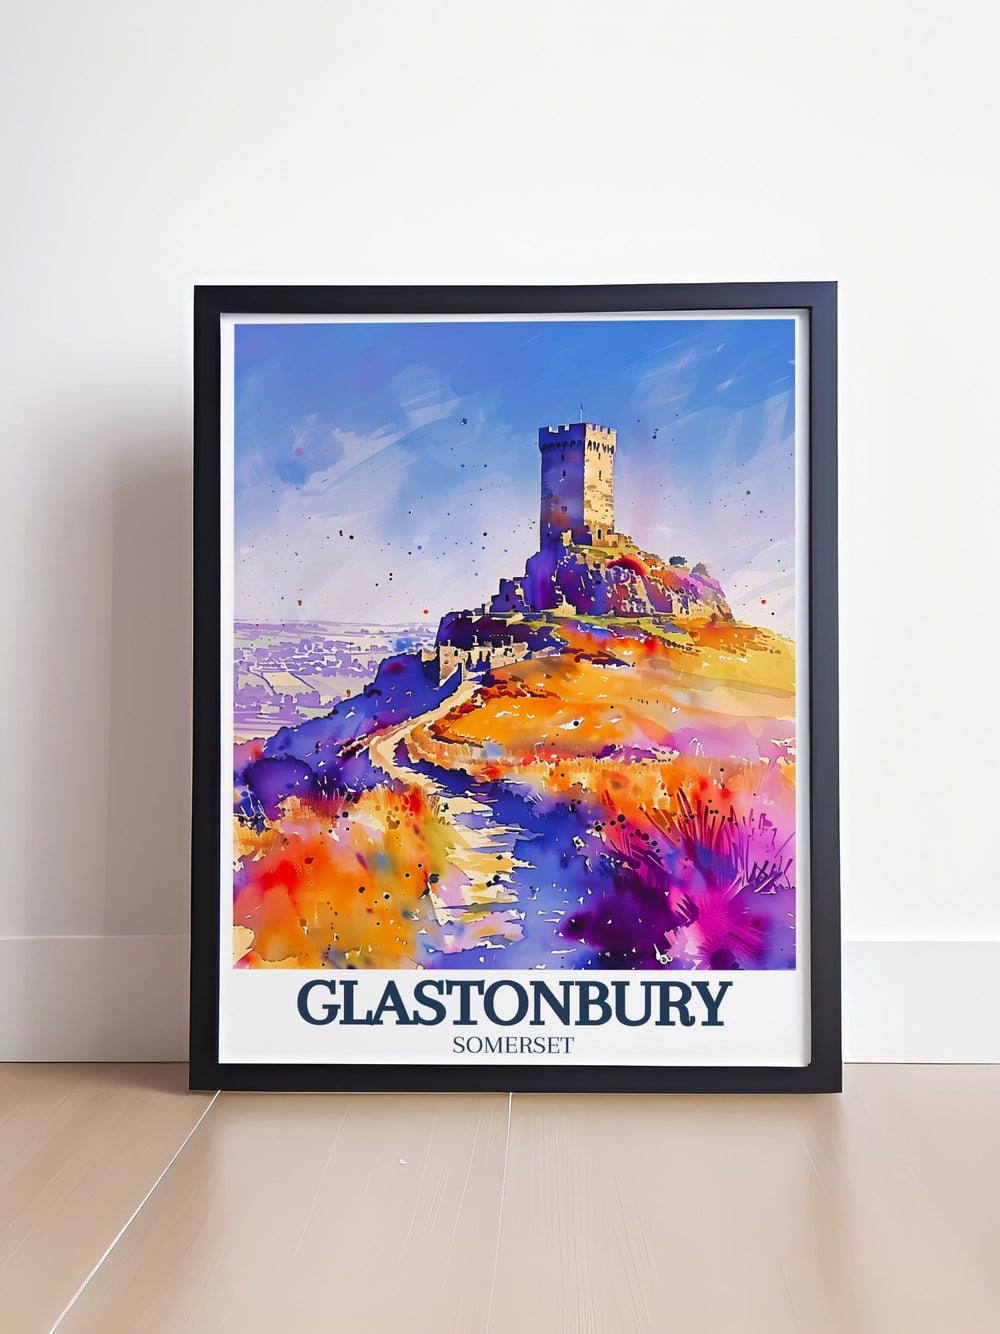 Beautifully detailed Glastonbury Tor artwork showcasing St. Michaels tower and Somerset levels an excellent addition to UK art collections perfect for anyone looking for England travel gifts or stunning wall art to decorate their living space.